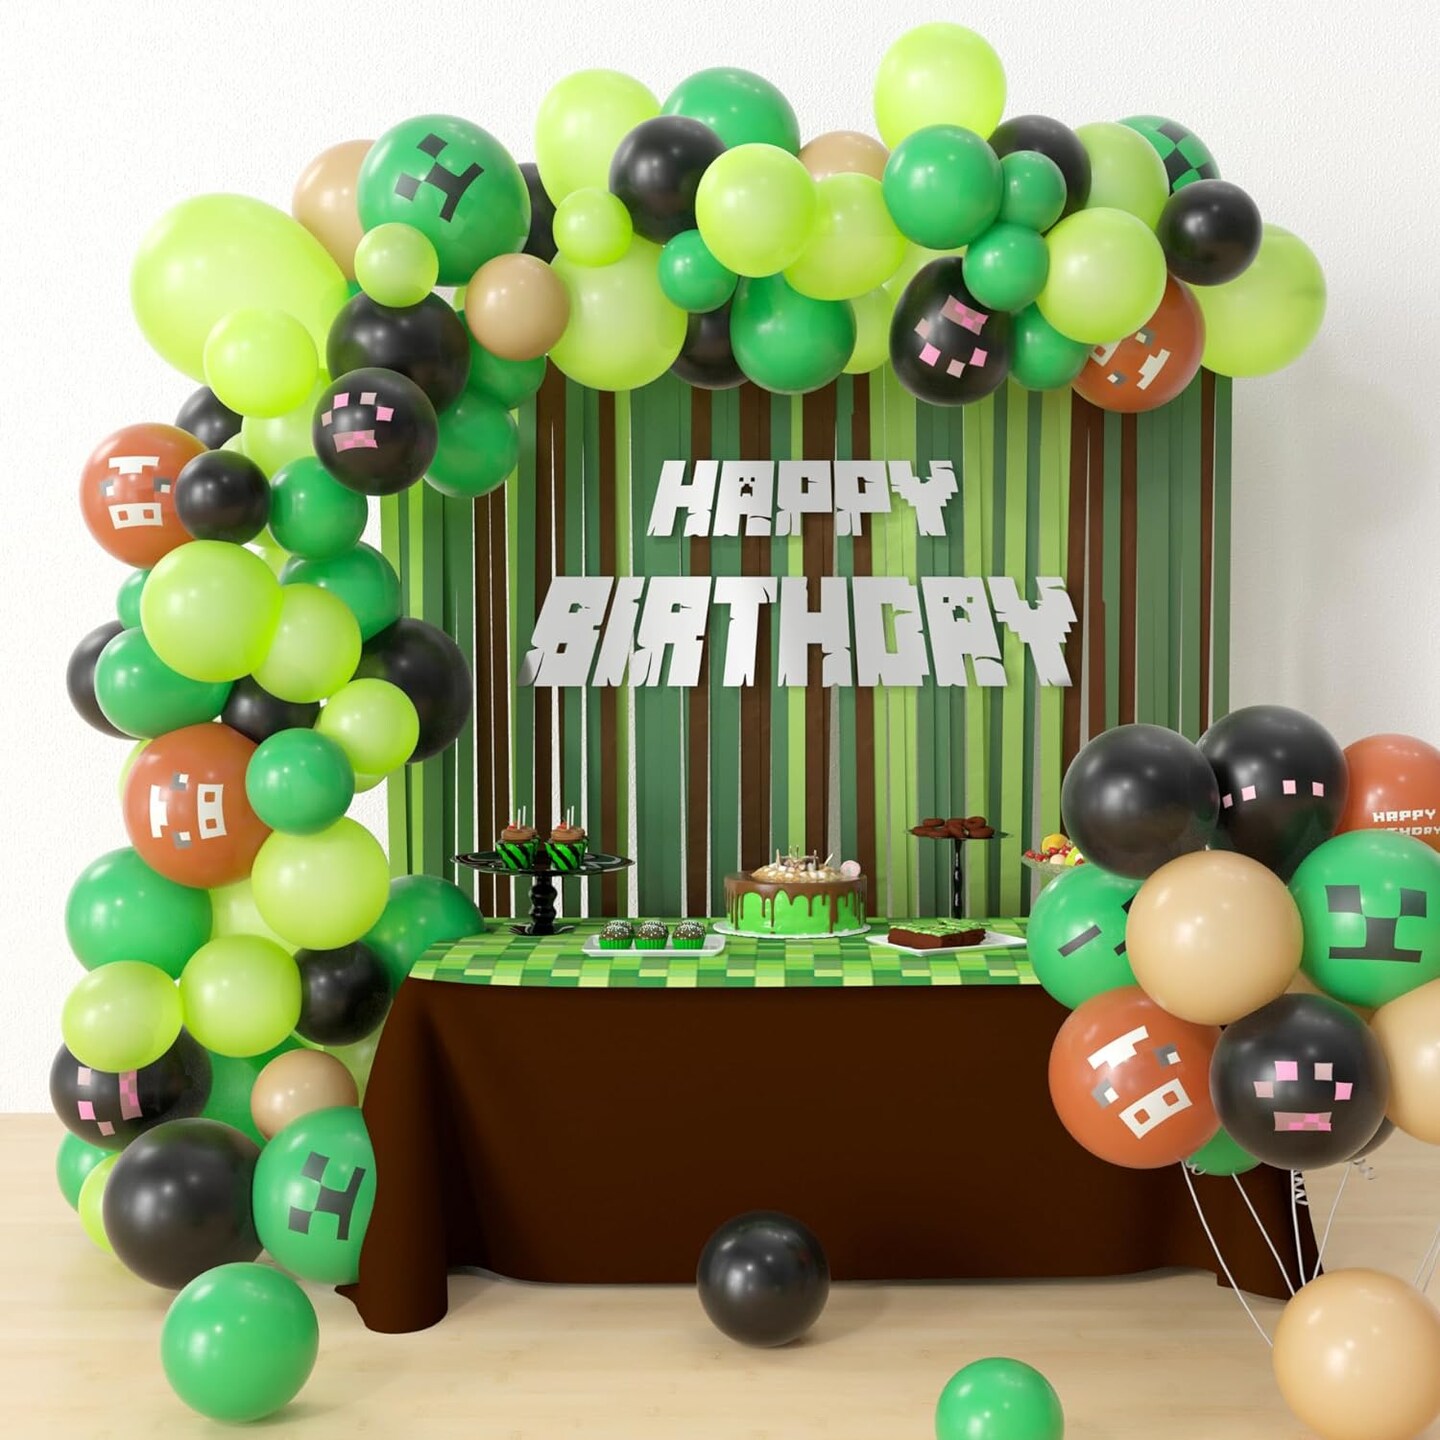 Miner Crafting Birthday Party Supplies - 115 Pcs Miner Crafting Balloon Garland Arch Kit, Green Brown Balloon Arch Decorations For Video Game Theme Miner Crafting Party Decorations Backdrop